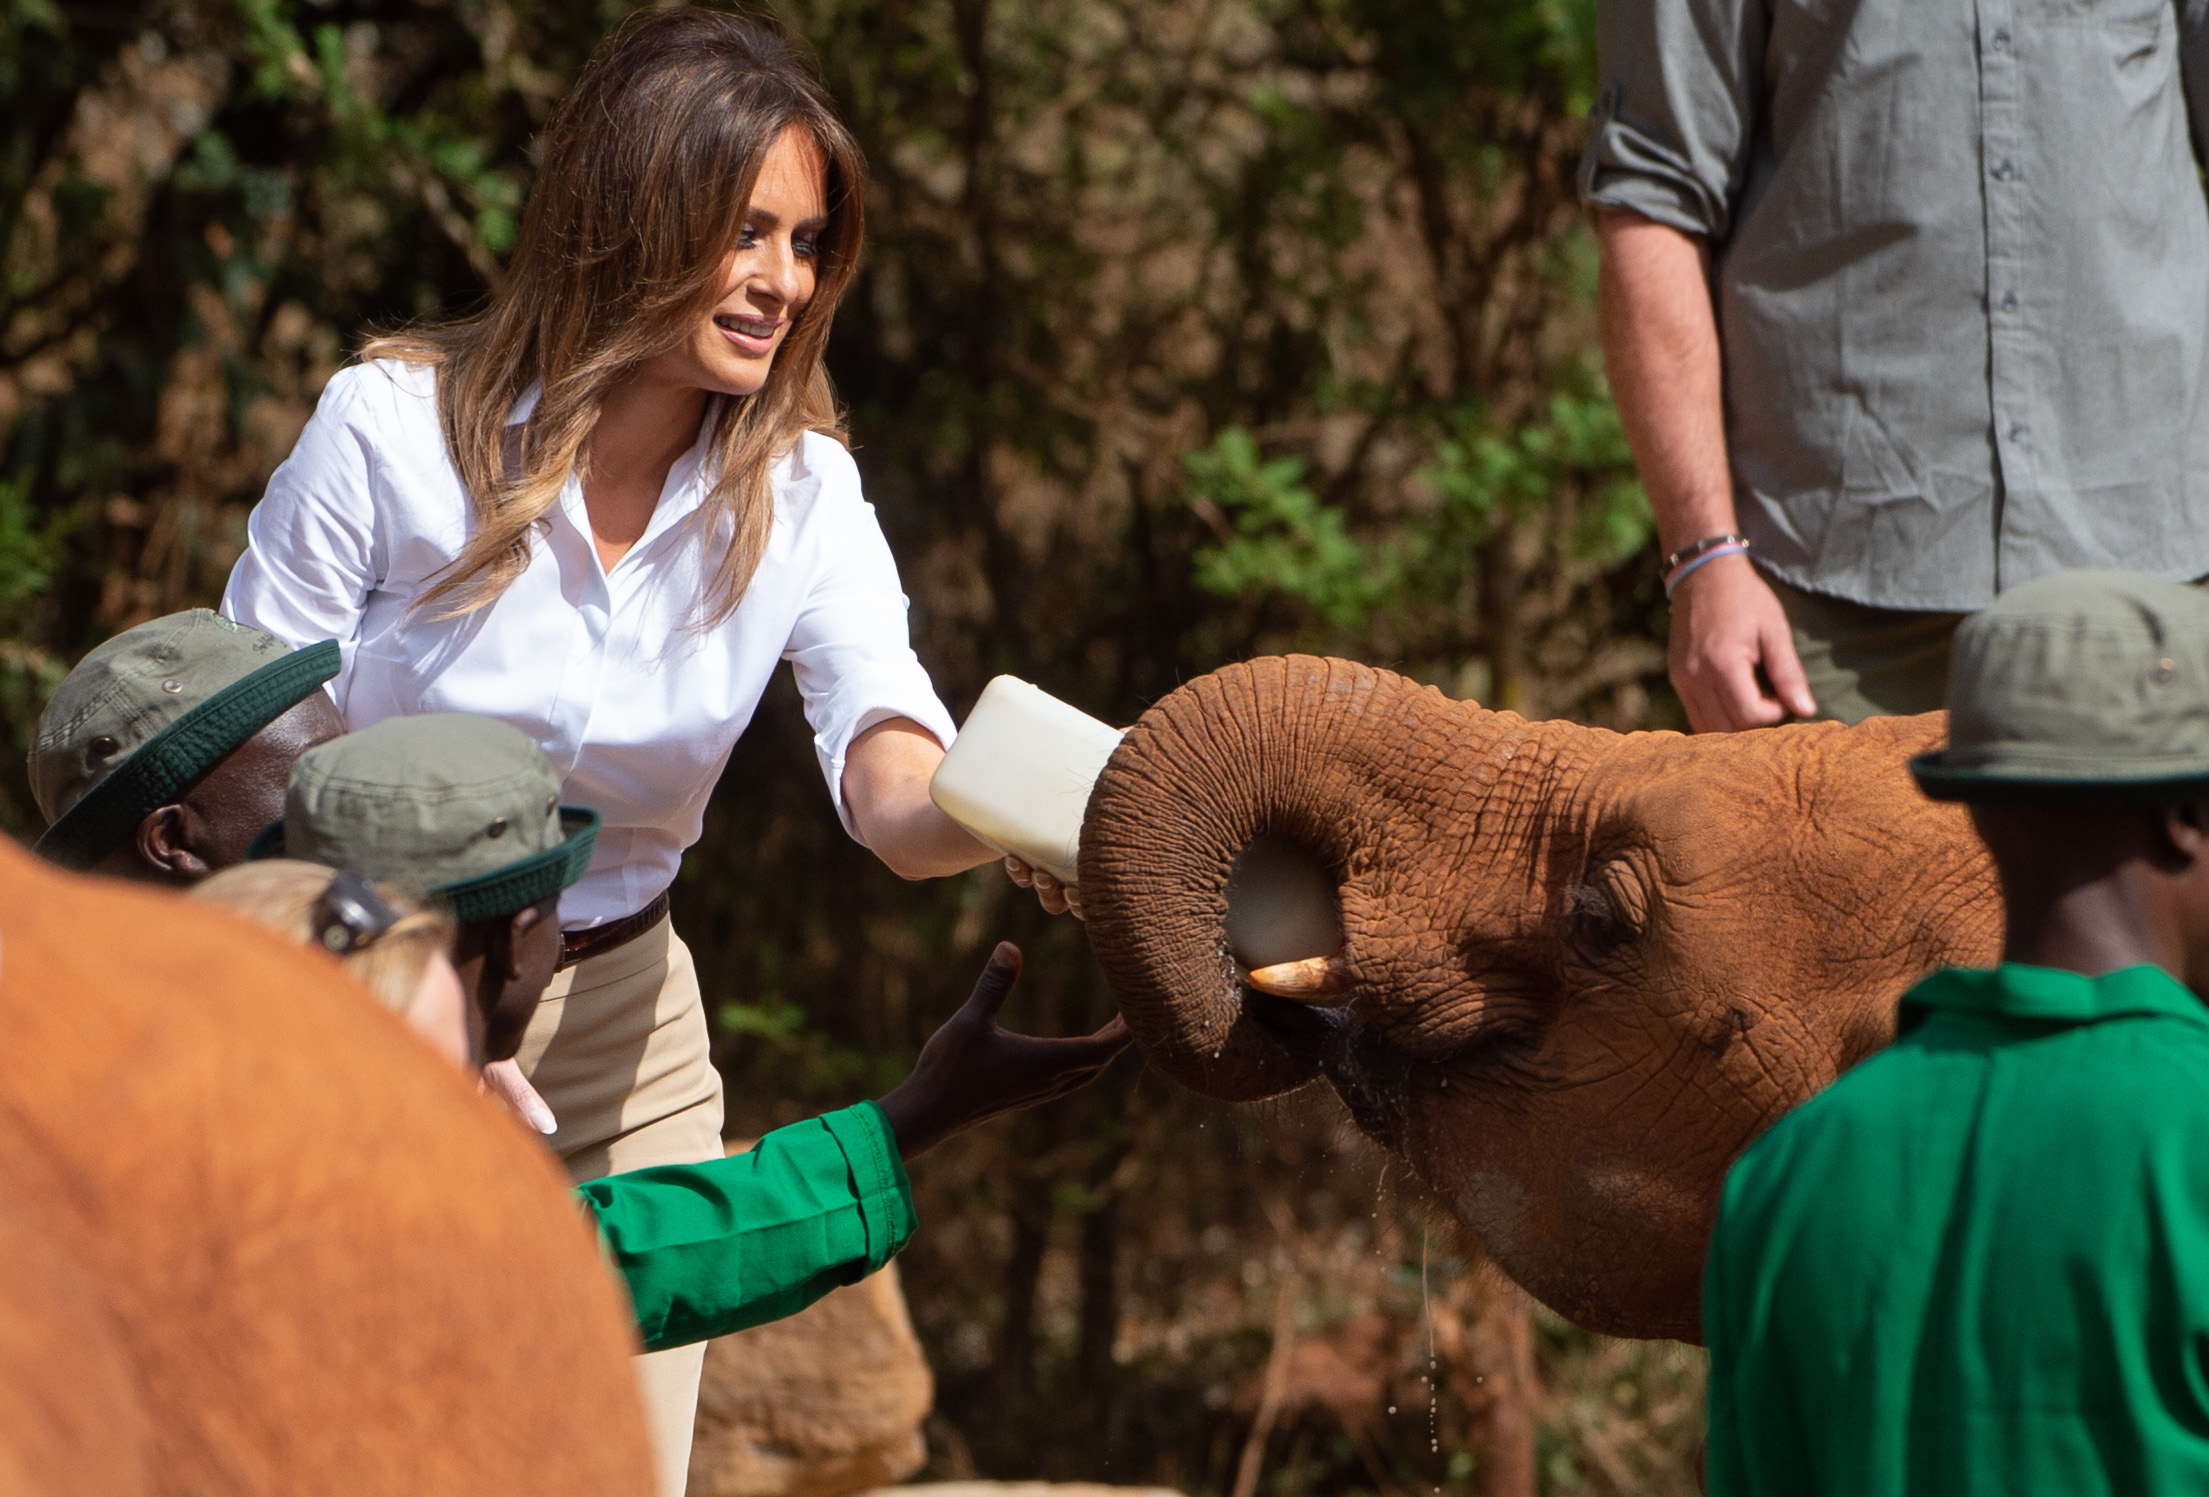 US First Lady Melania Trump feeds a baby elephant at The David Sheldrick Elephant Orphanage in Nairobi on October 5, 2018, as she pays a one day visit to the country during her solo tour of Africa promoting her children's welfare program. (Photo by SAUL LOEB / AFP)